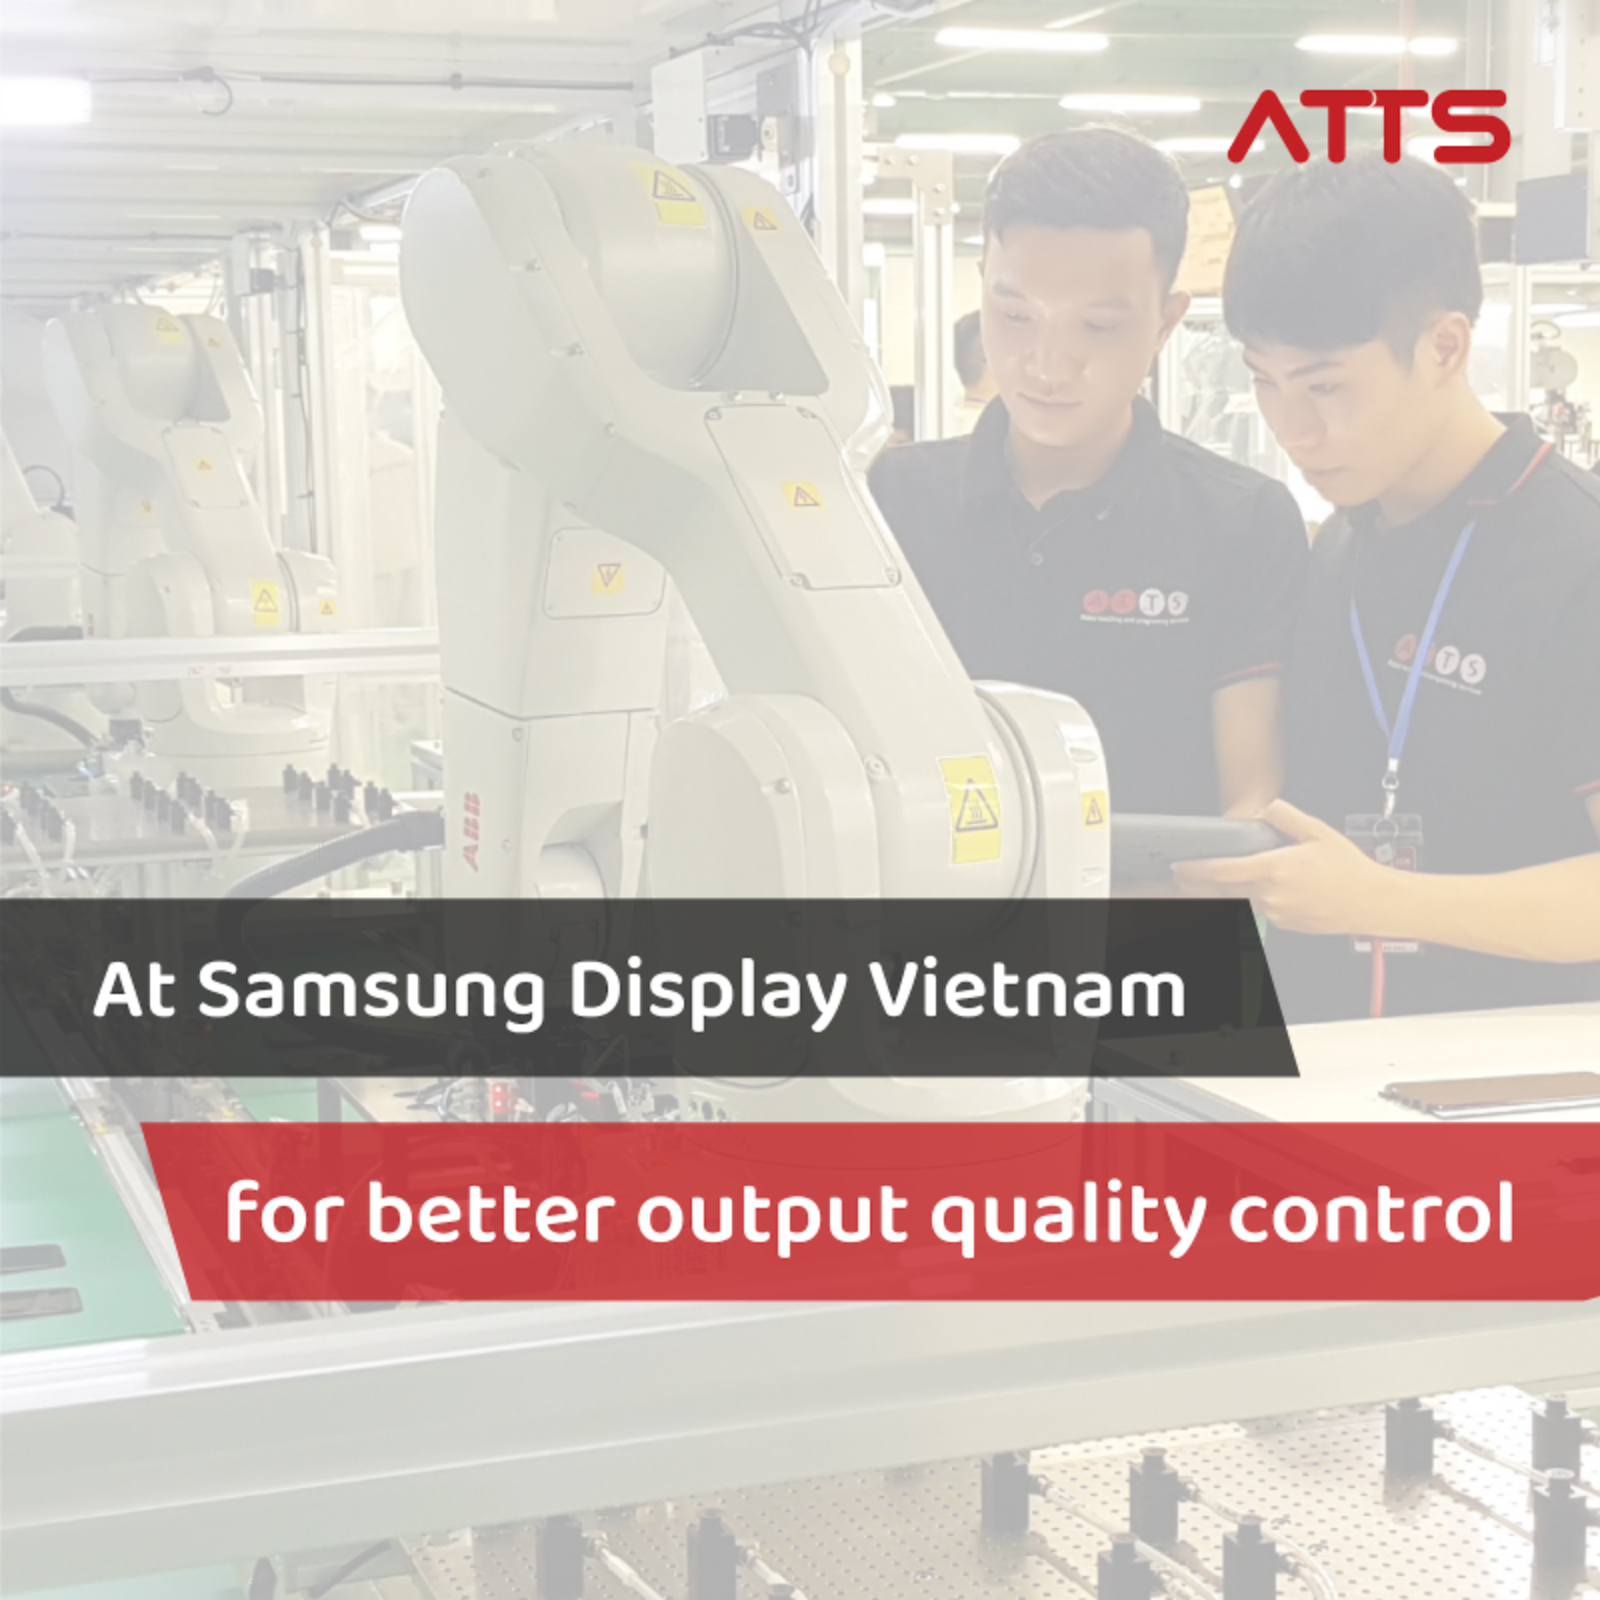 ATTS engineers work hard towards improving the output quality control stage for SDV.